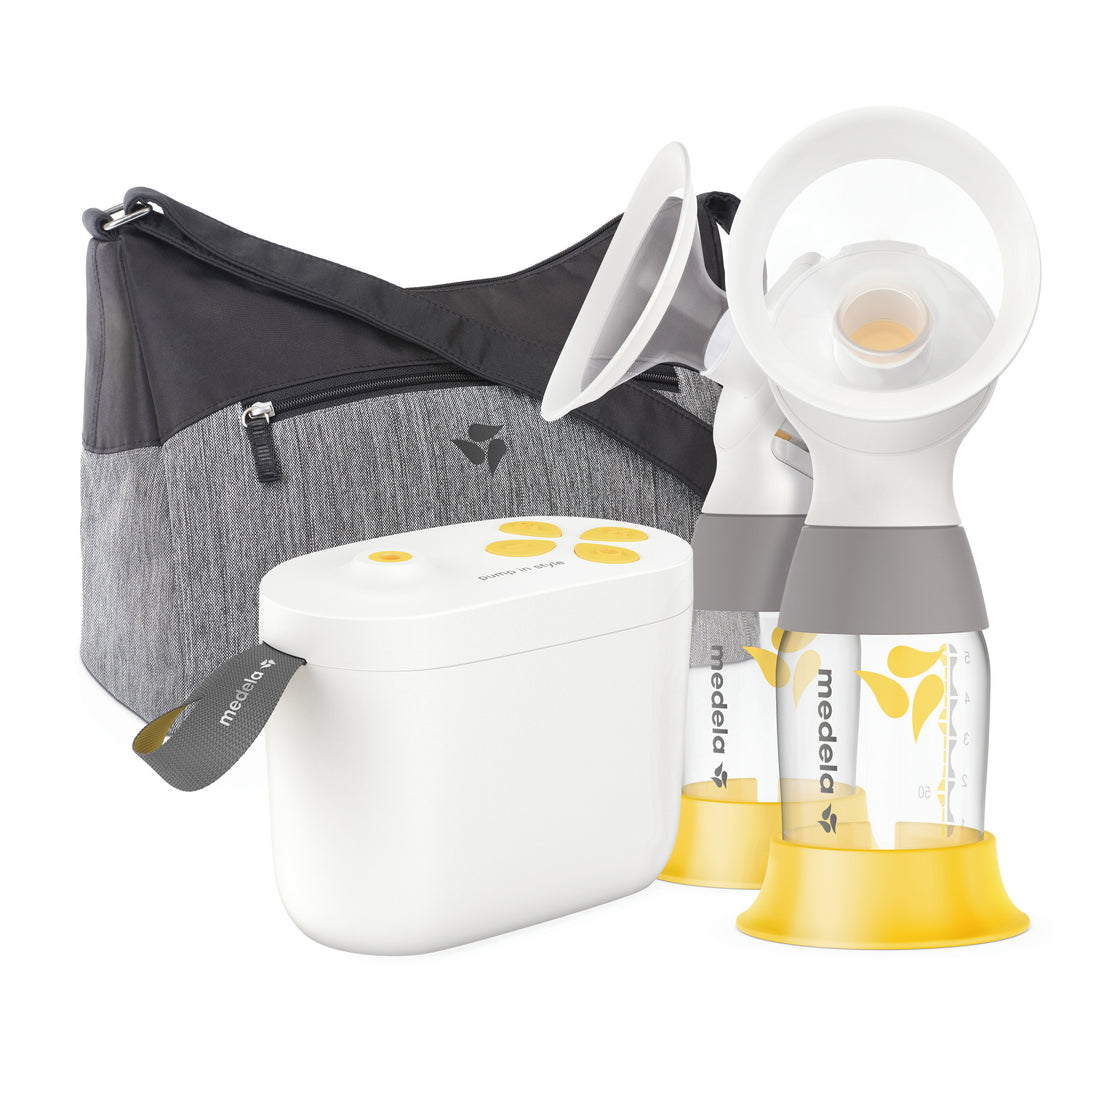 Medela Pump In Style Breast Pump with MaxFlow